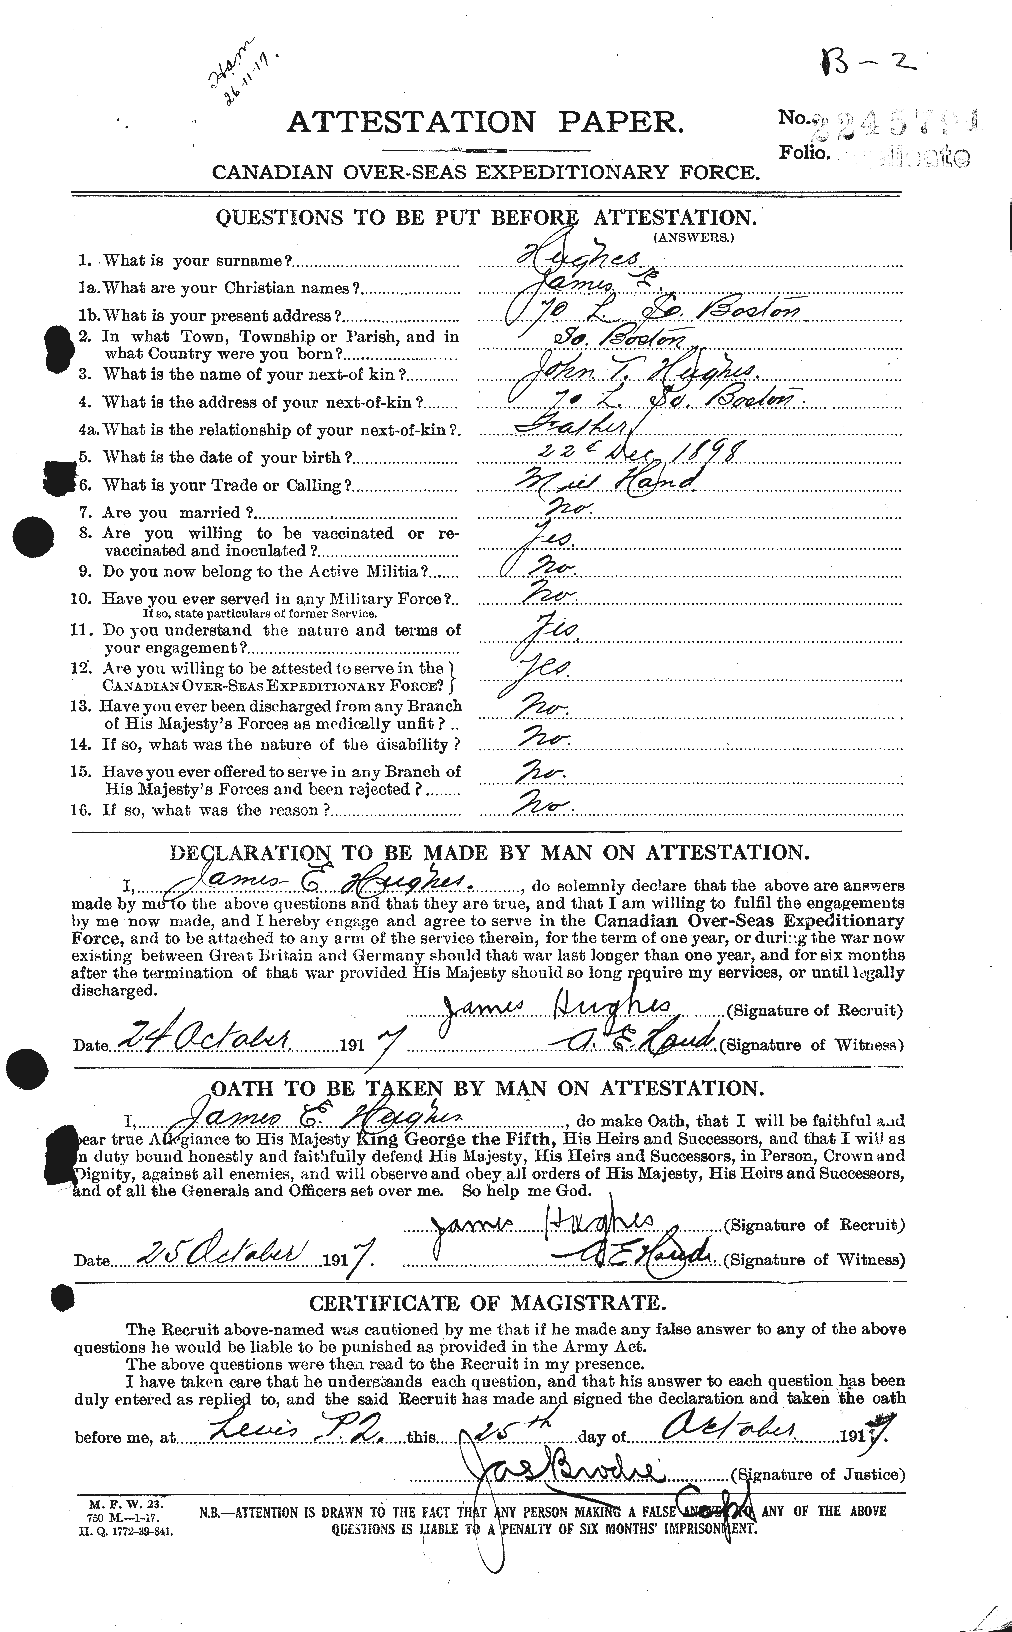 Personnel Records of the First World War - CEF 403958a